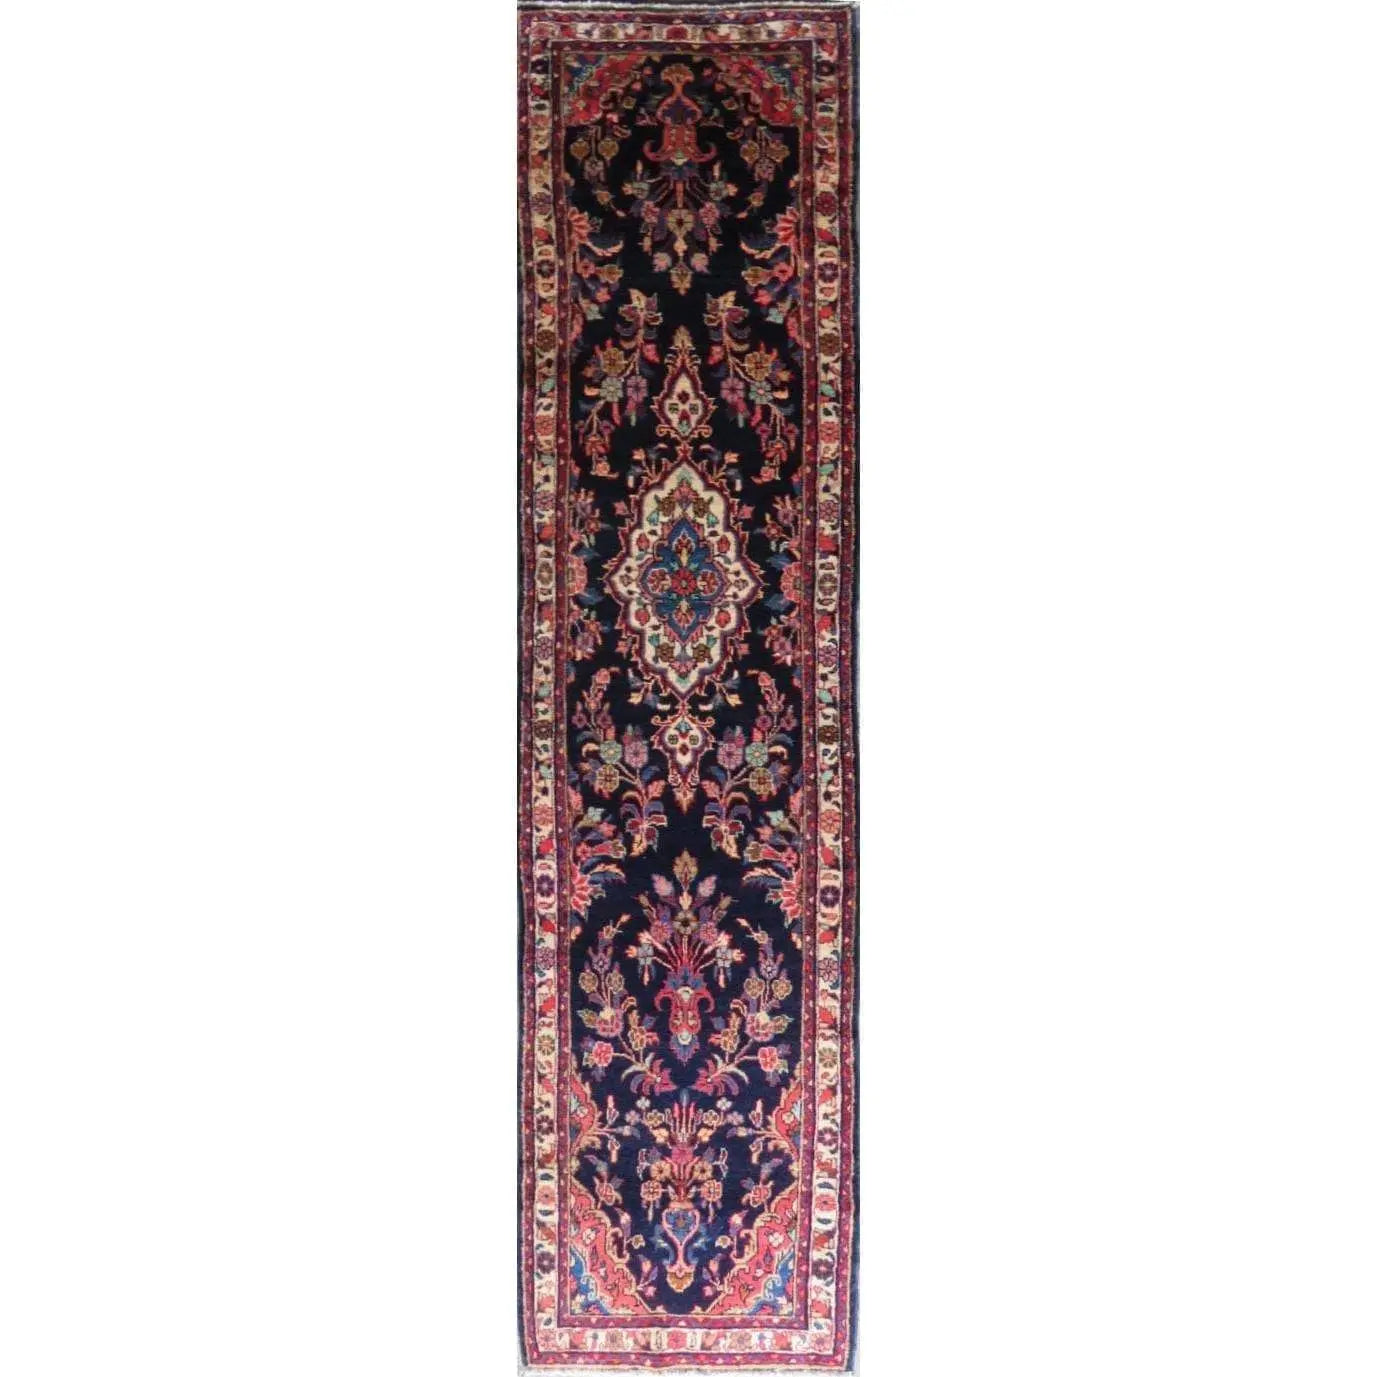 Hand-Knotted Vintage Rug 11'4" x 2'6"